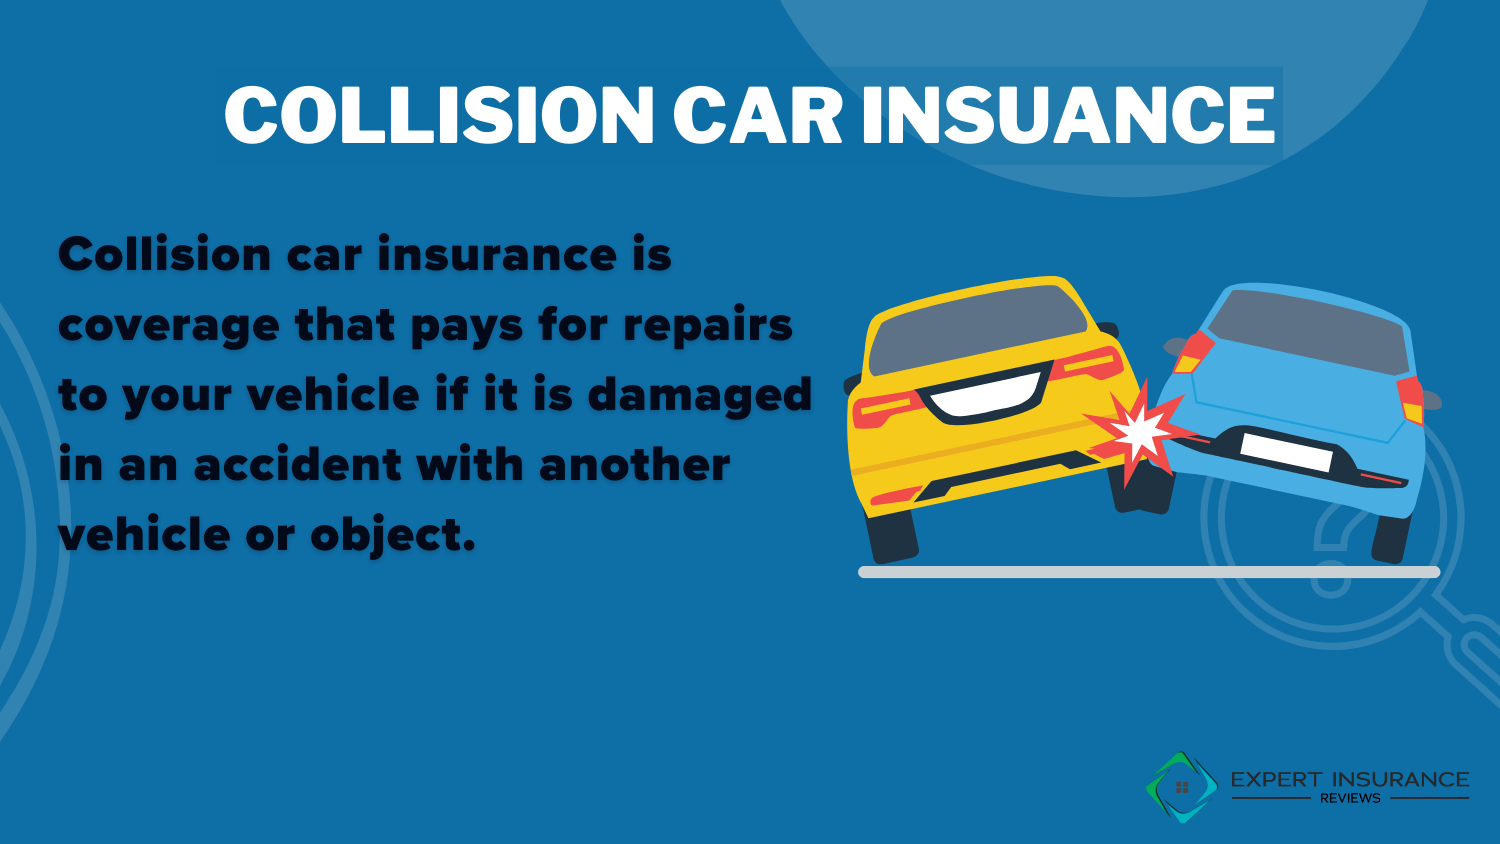 Best Car Insurance Companies for Toyotas: Collision Car Insurance Definition Card